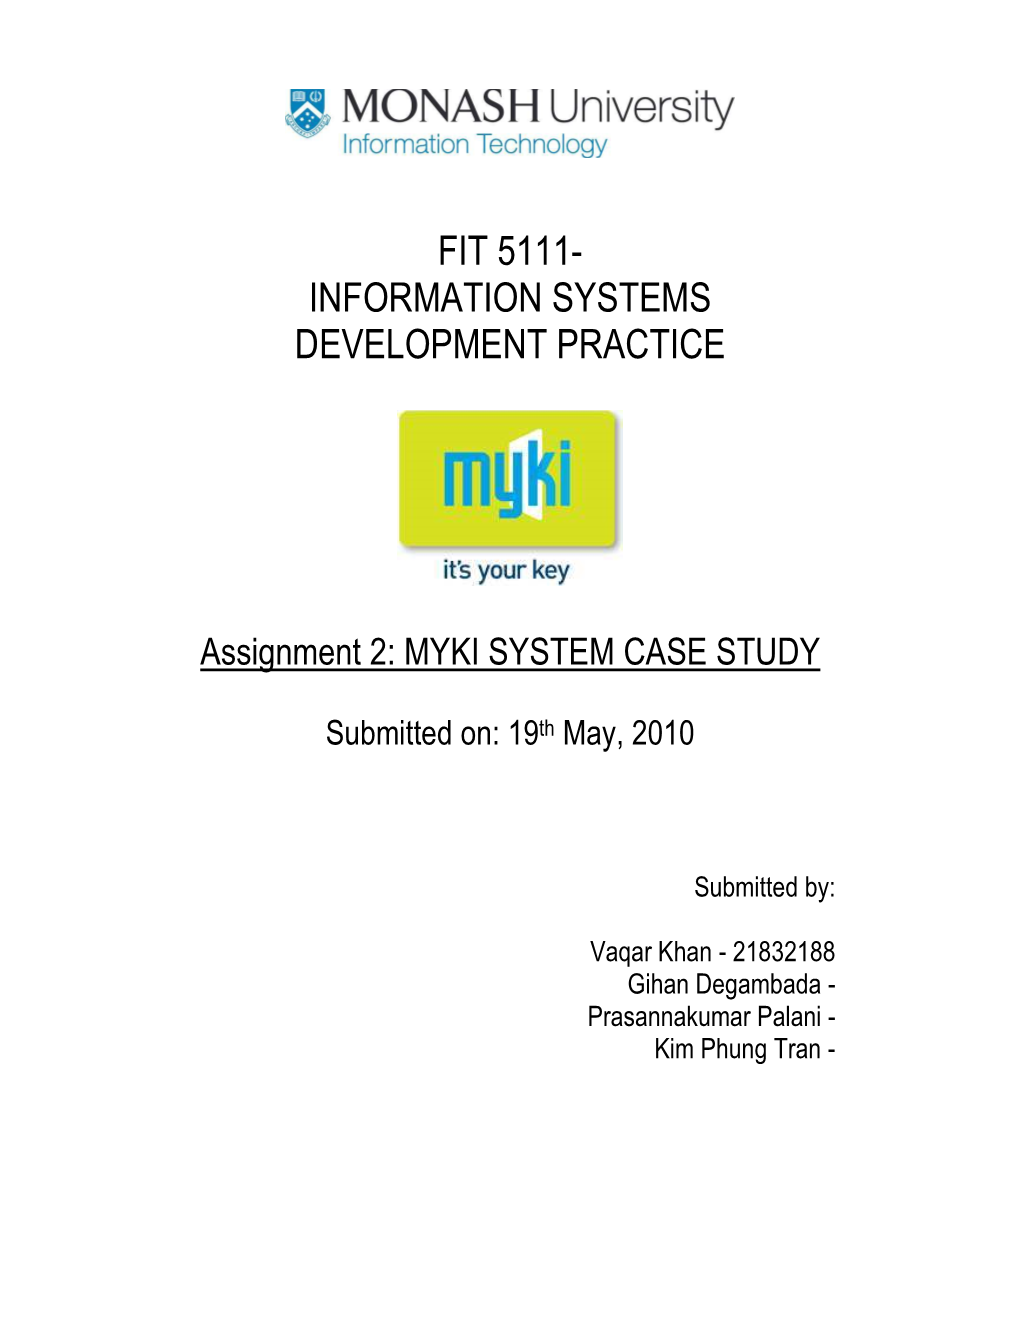 Fit 5111- Information Systems Development Practice